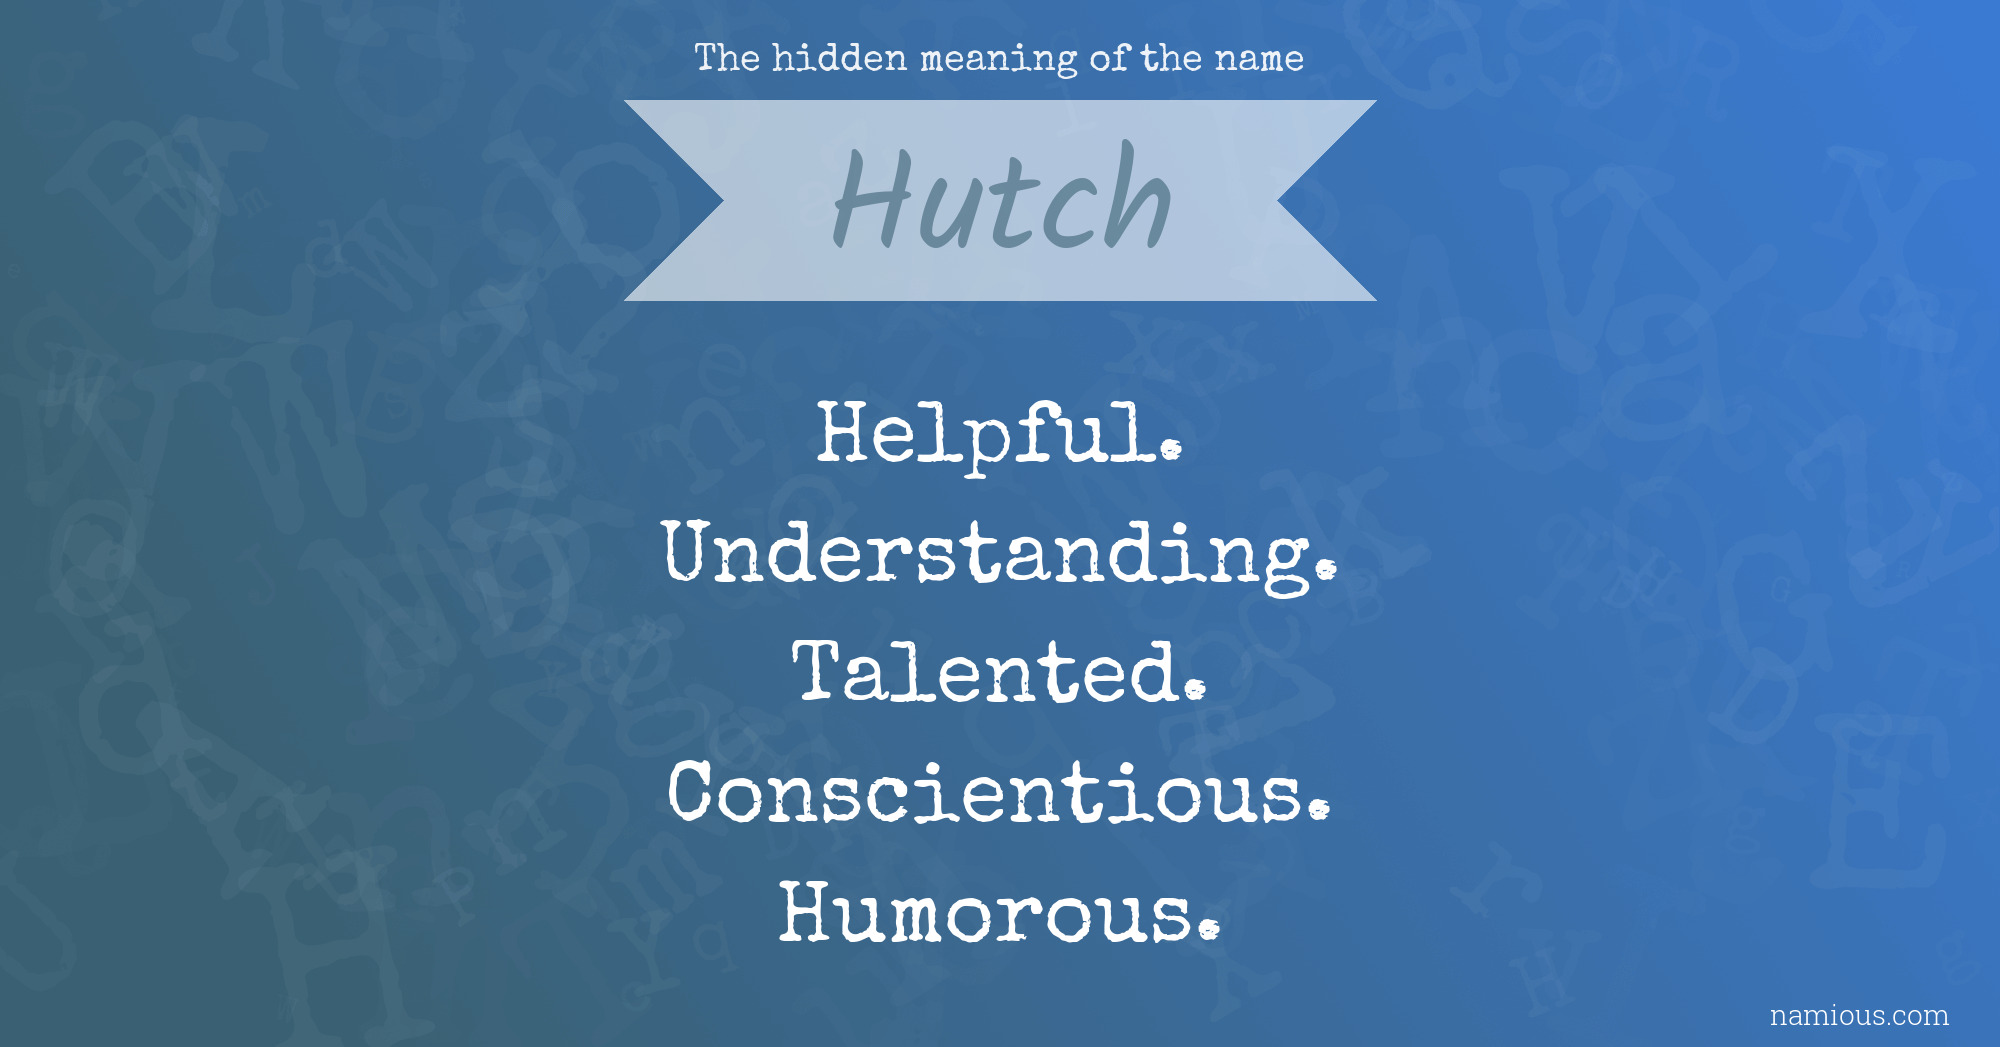 The hidden meaning of the name Hutch